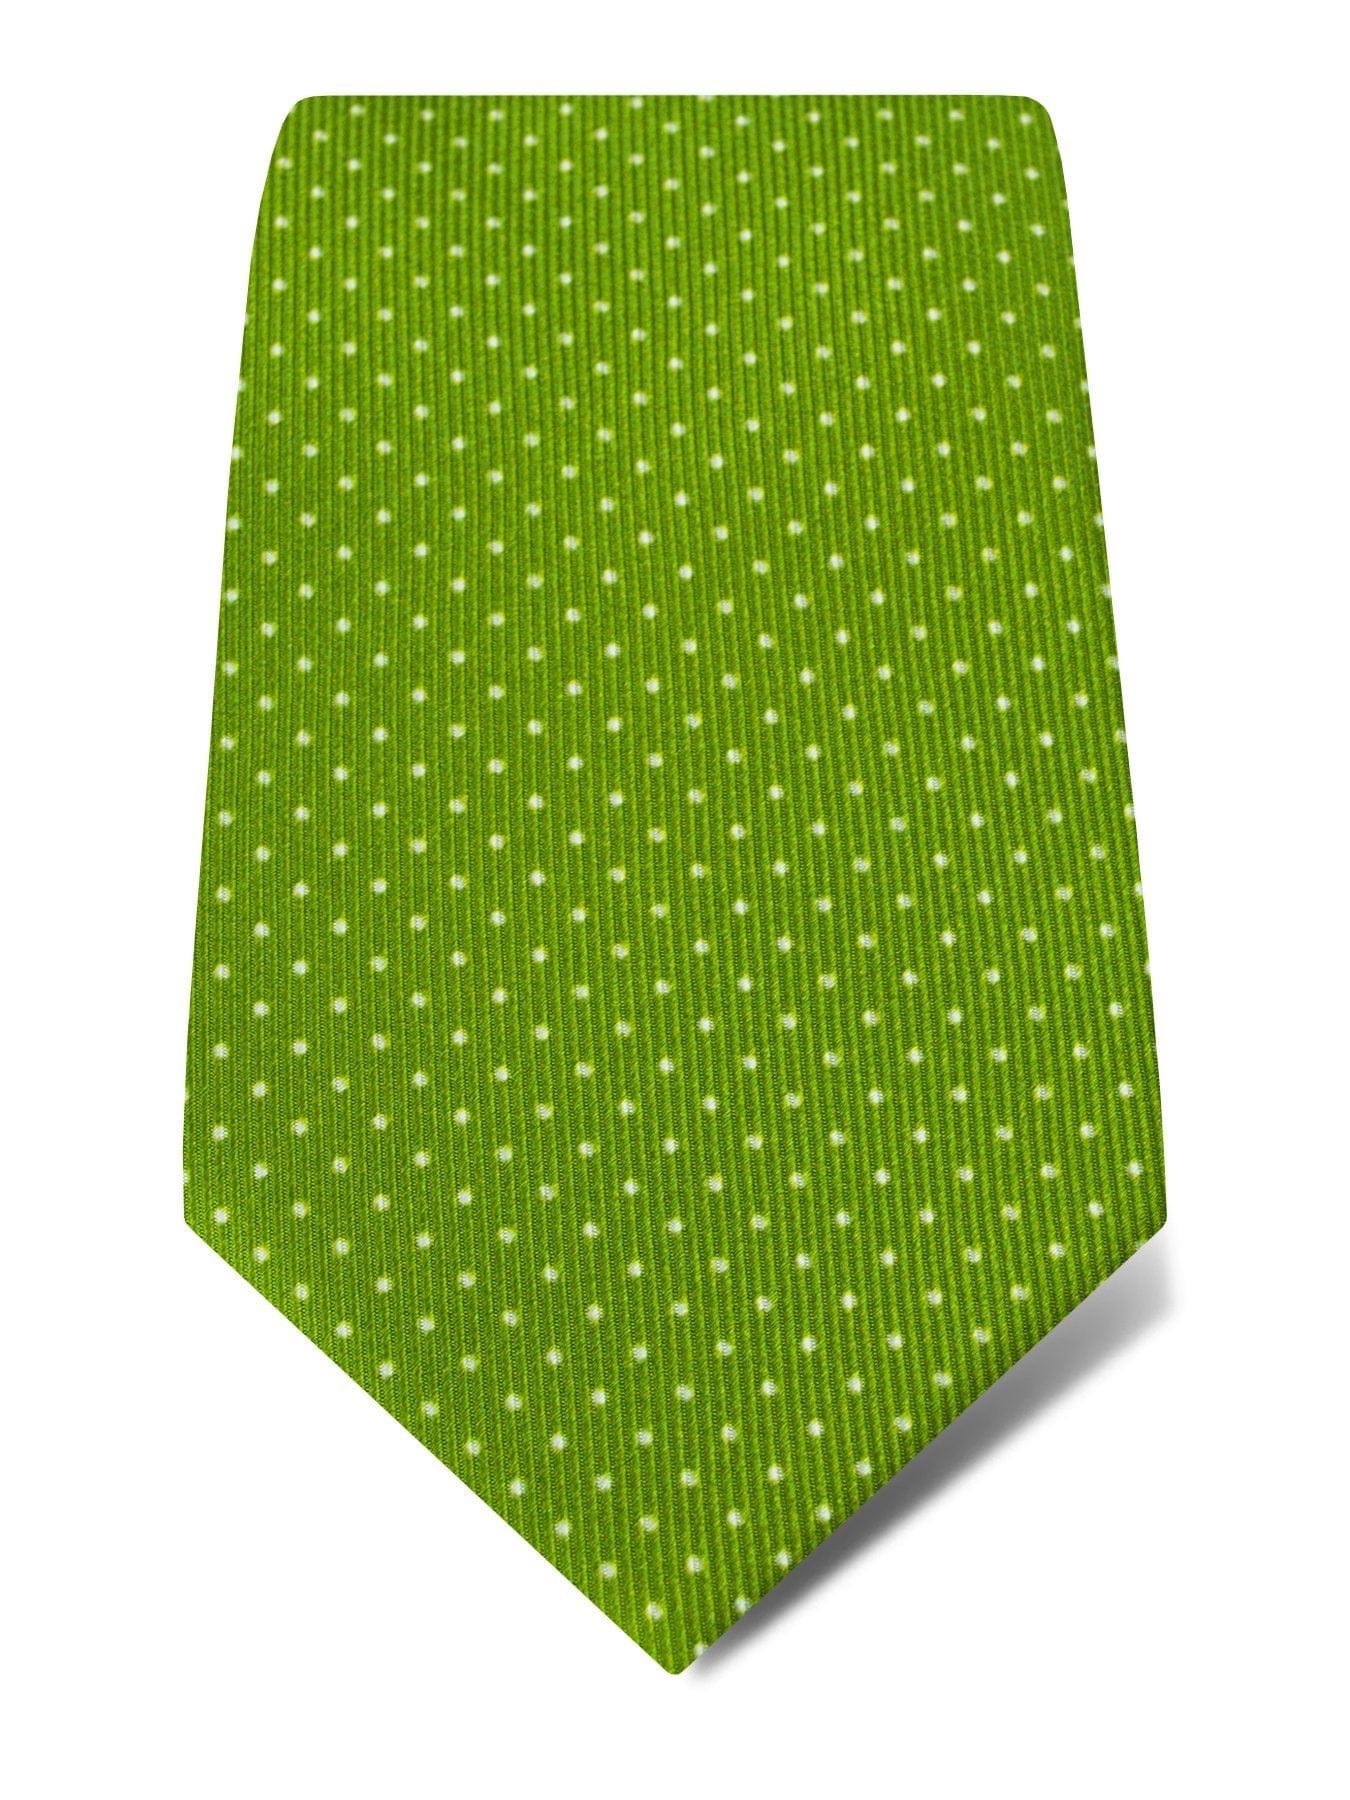 Lime Printed Silk Tie with White Pin Spots